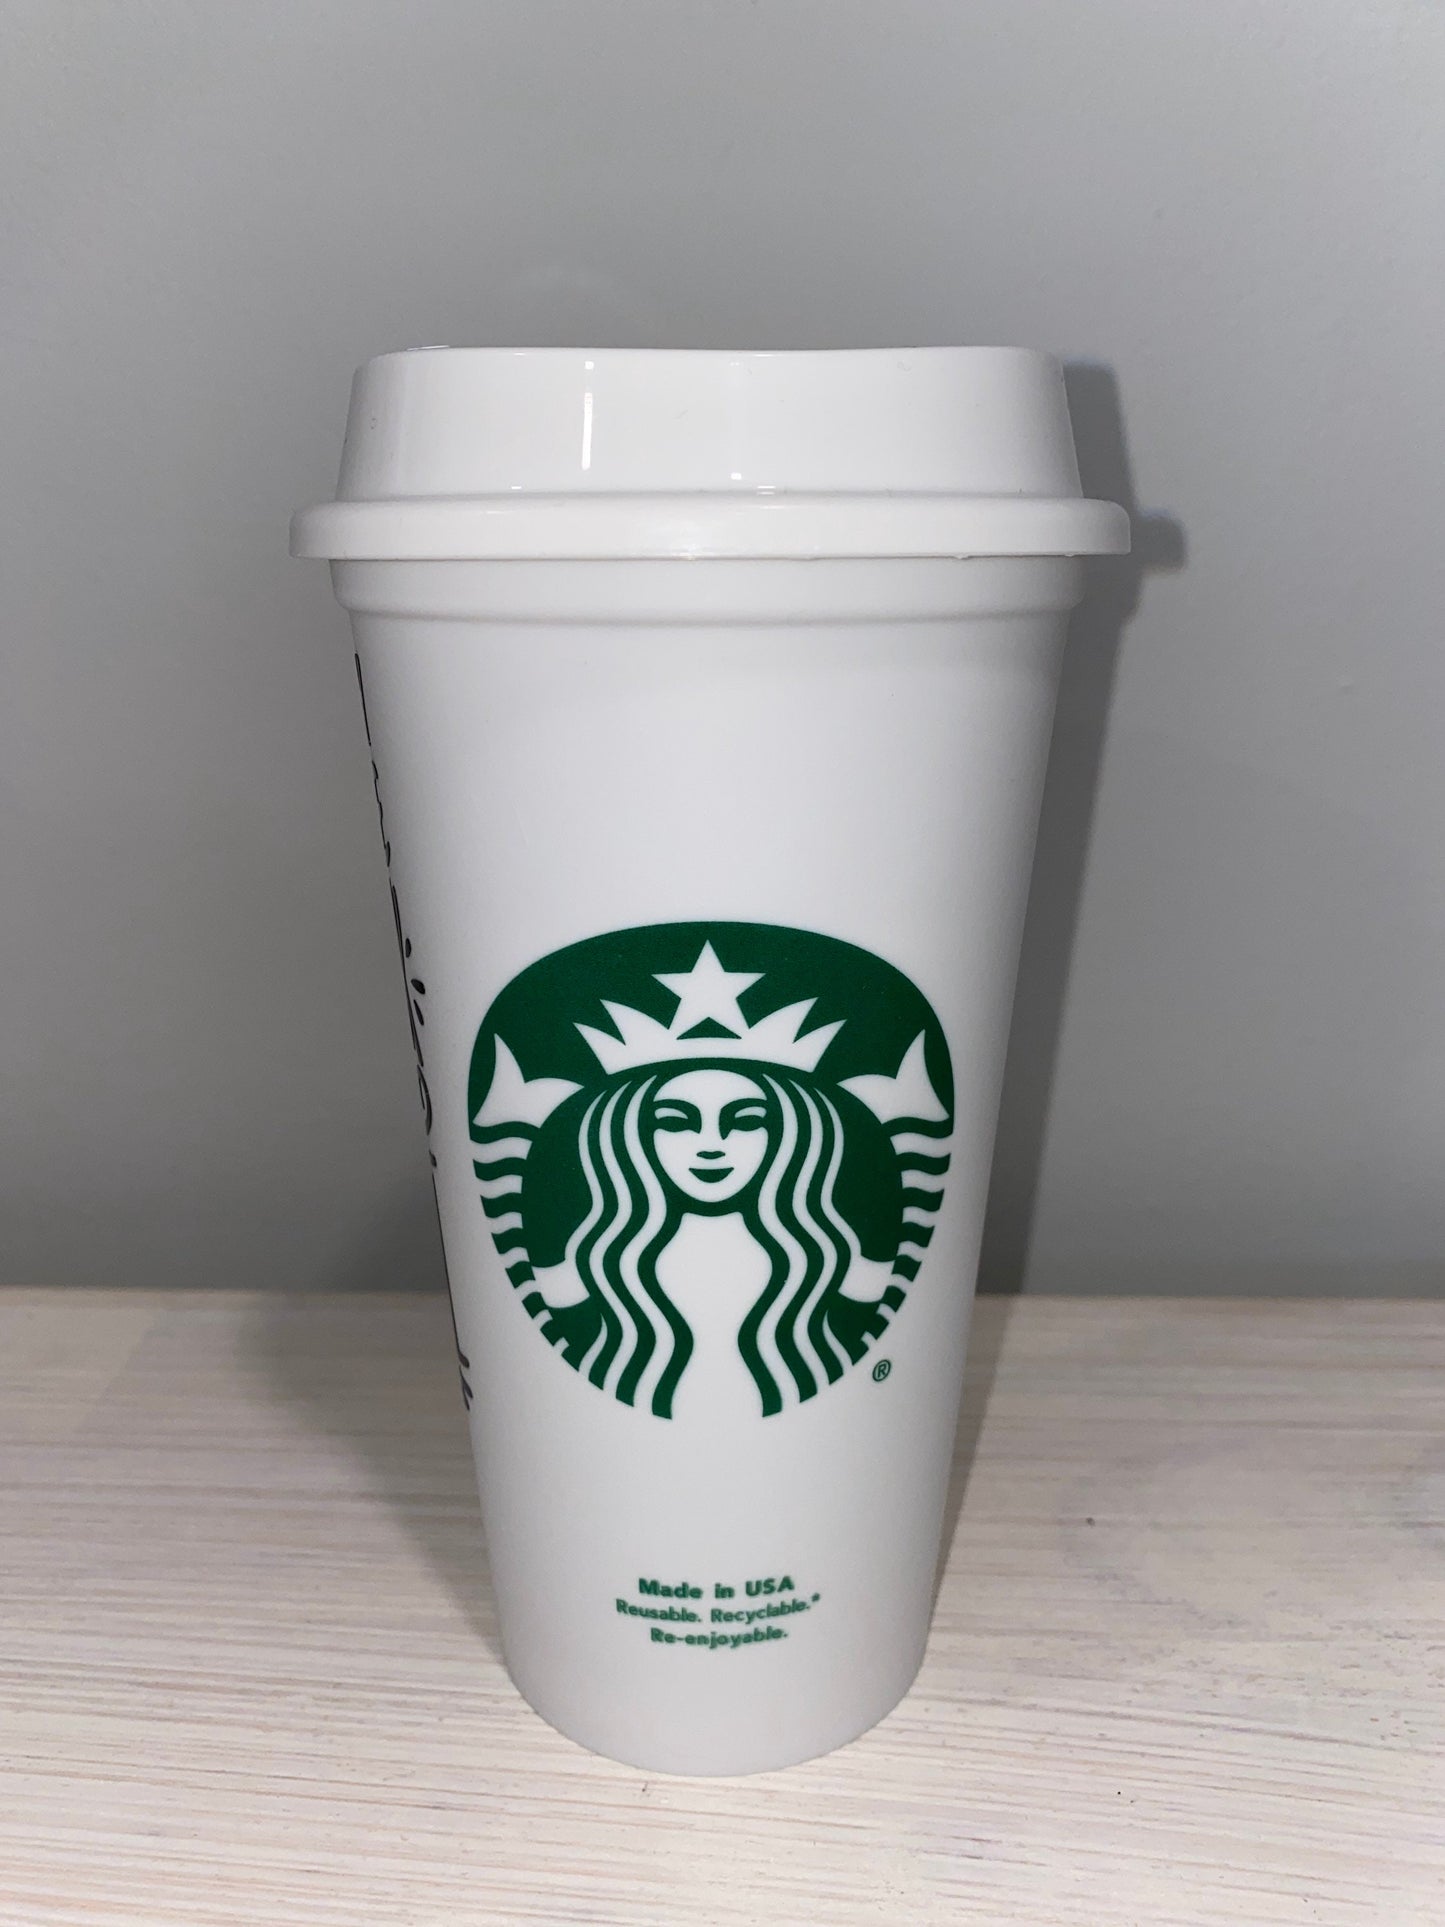 Mail Carrier of The Year Cup, mail carrier gift, mailman gift, essential worker gift, usps gift, usps starbucks